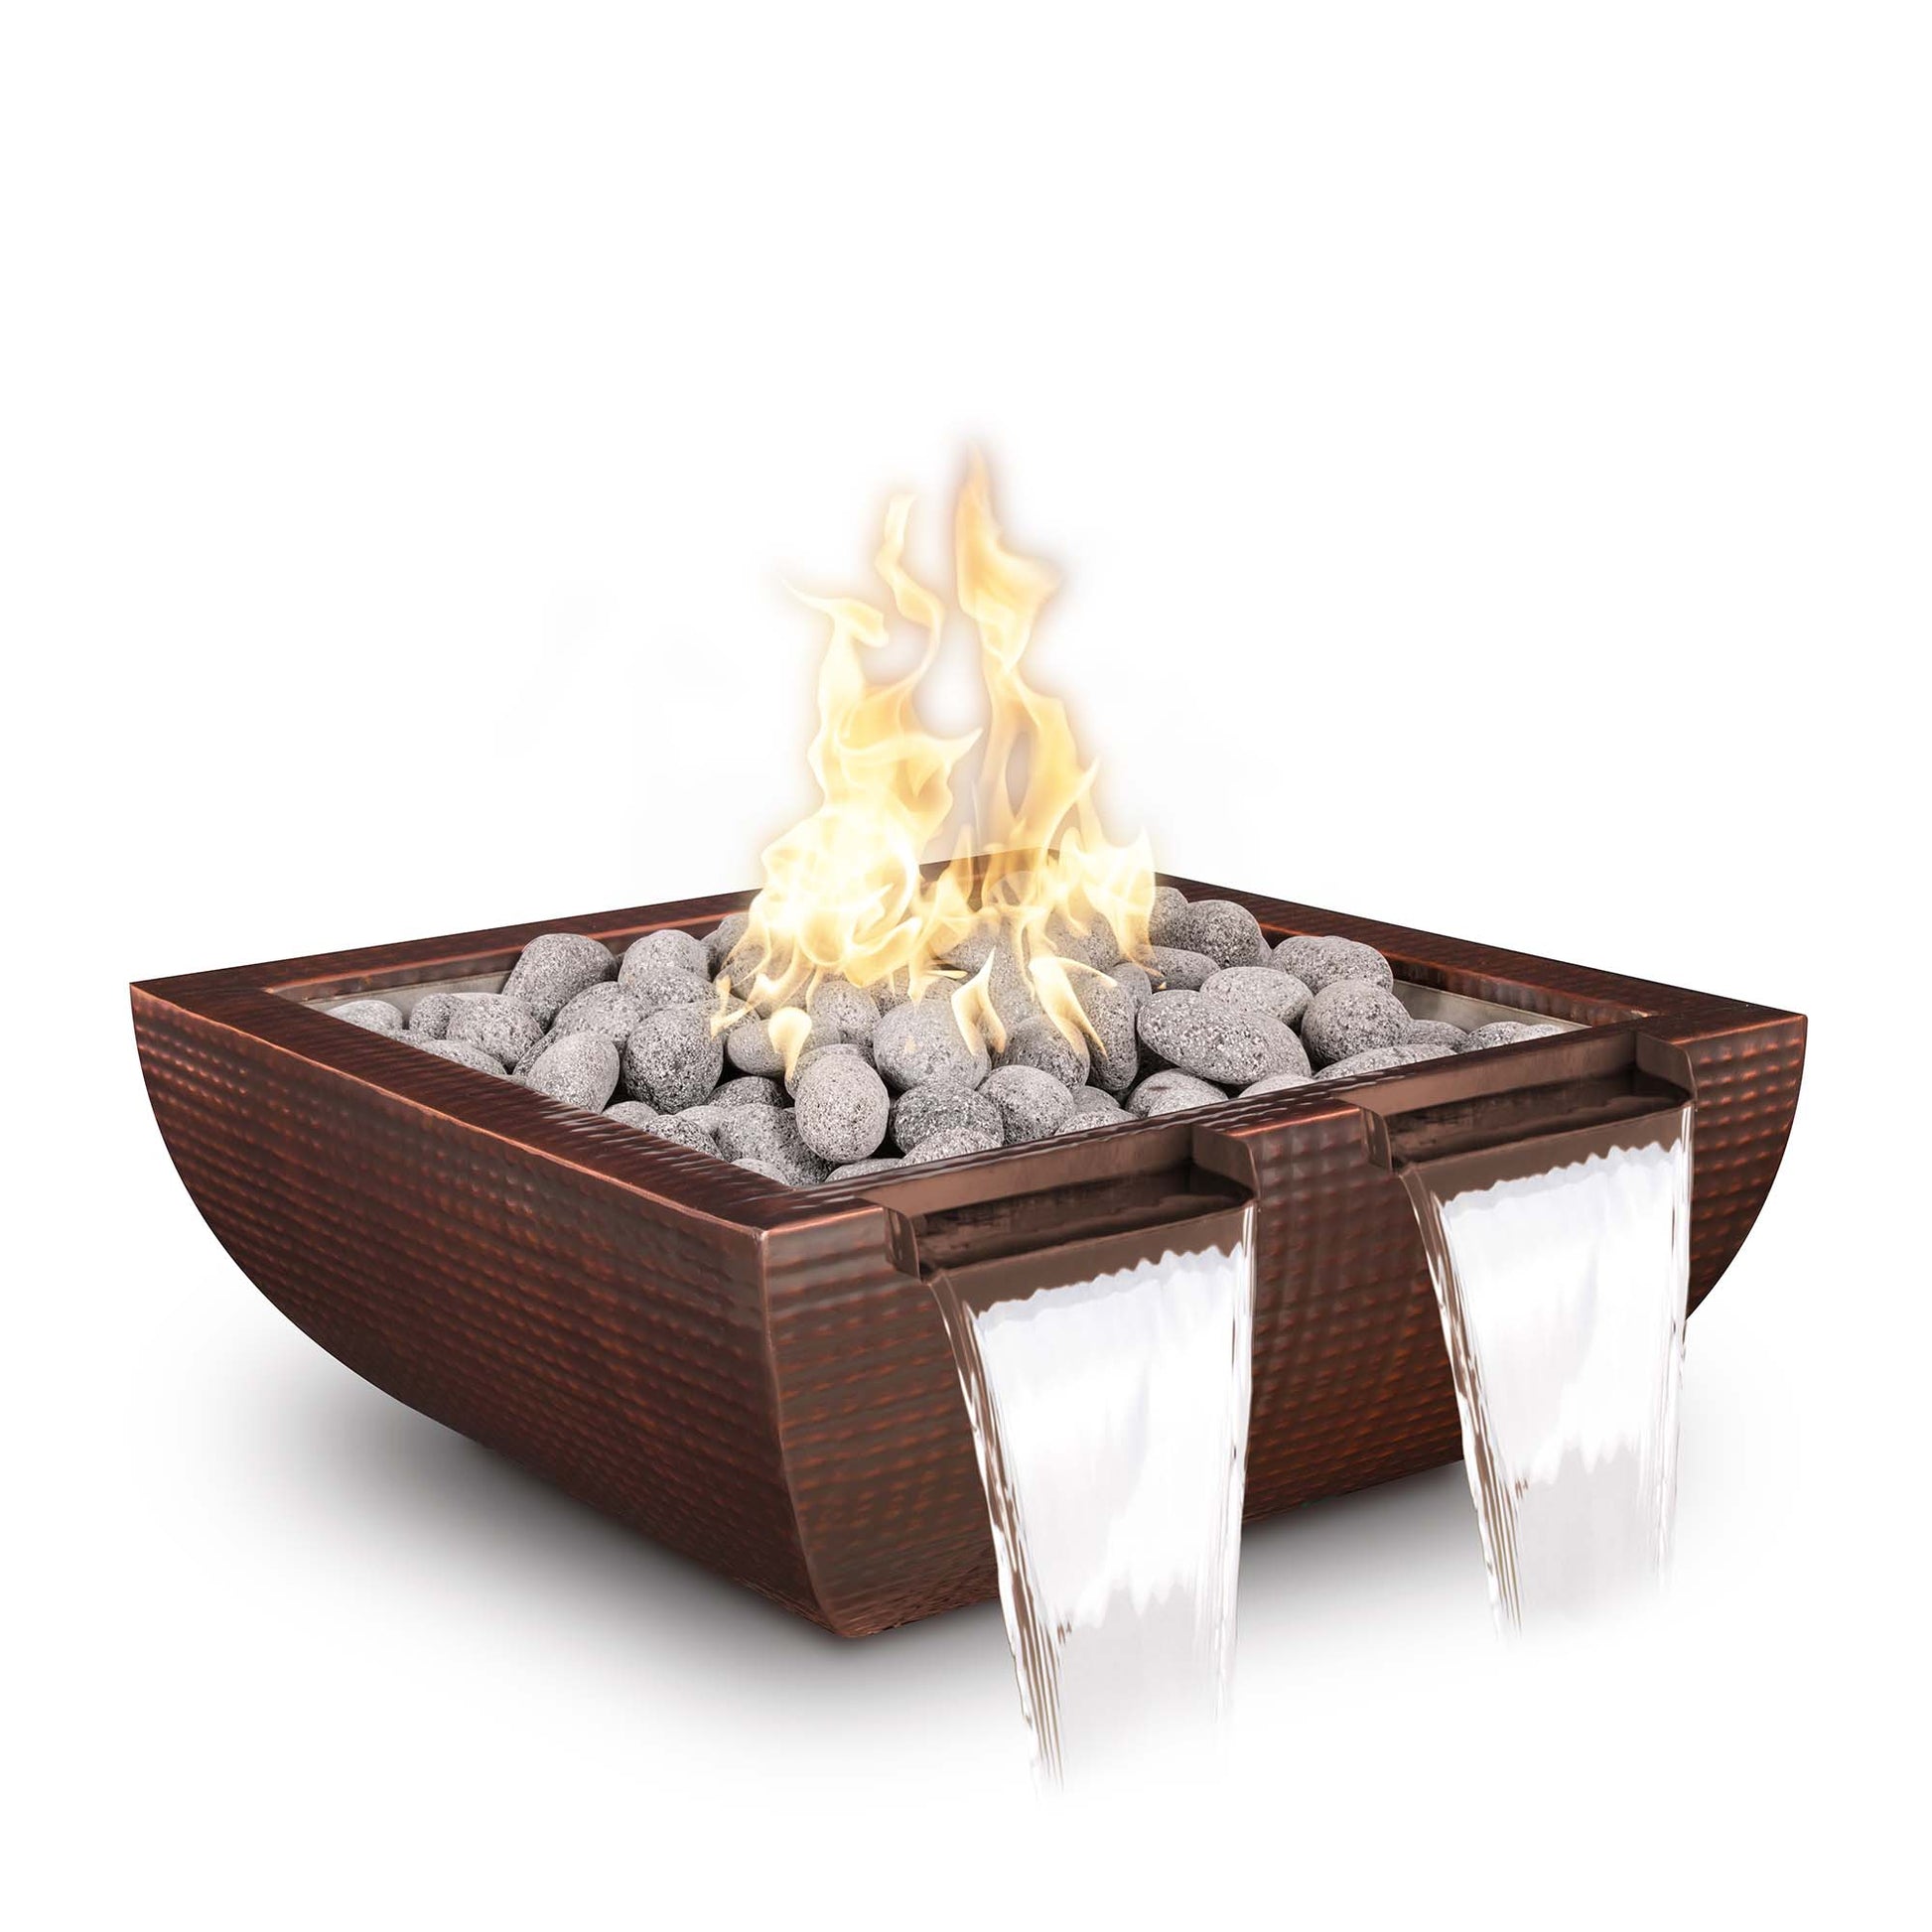 The Outdoor Plus Avalon Twin Spill 36" Pewter Powder Coated Metal Liquid Propane Fire & Water Bowl with Match Lit Ignition